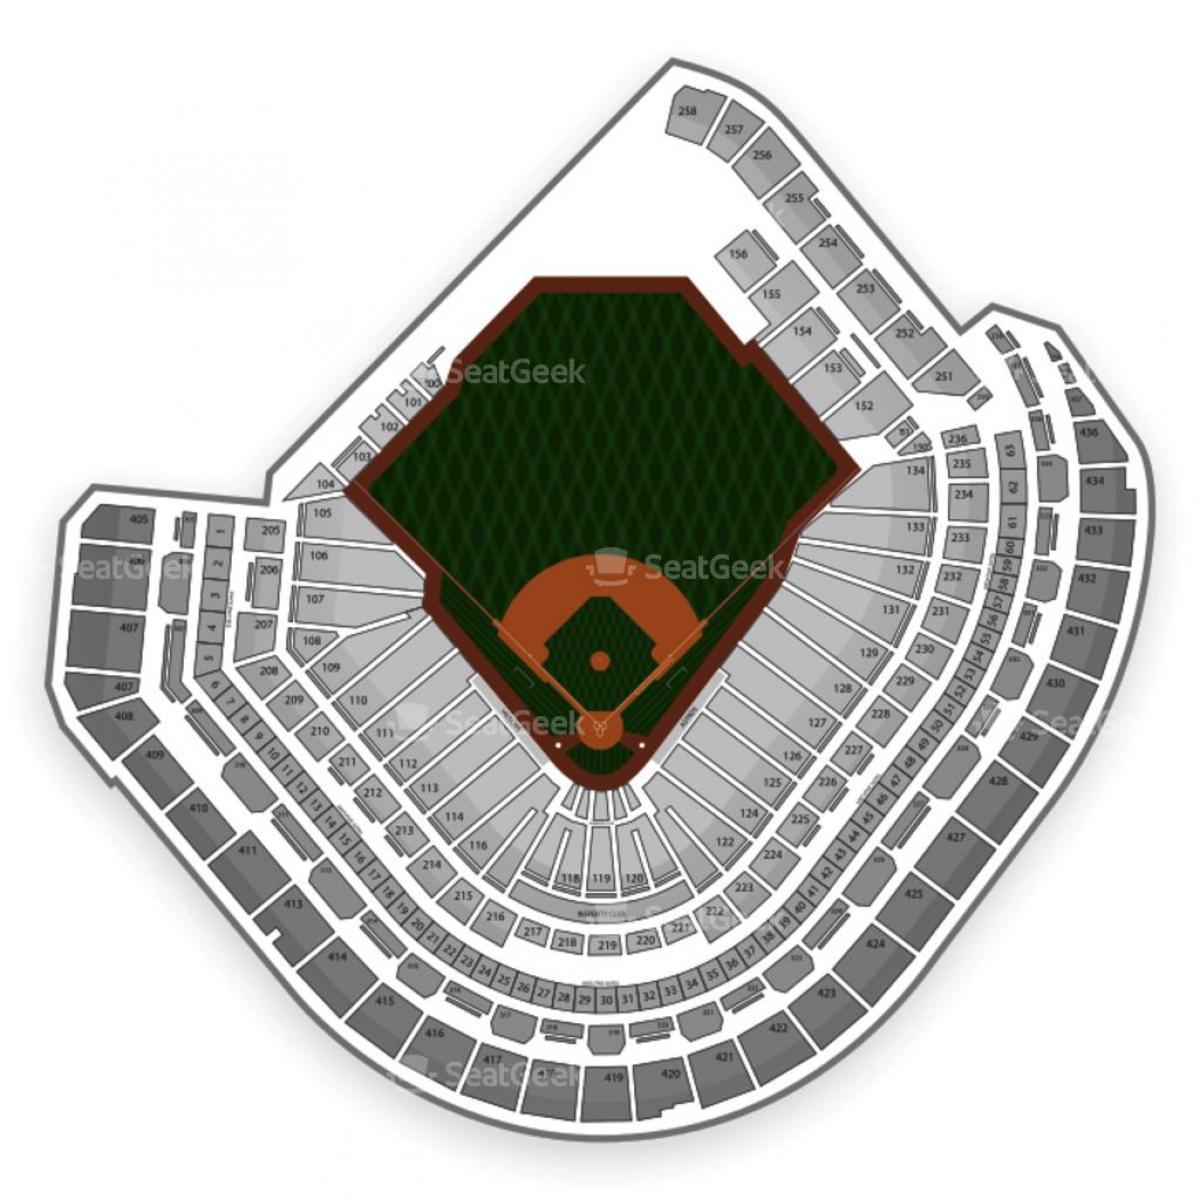 map of Minute Maid park seating